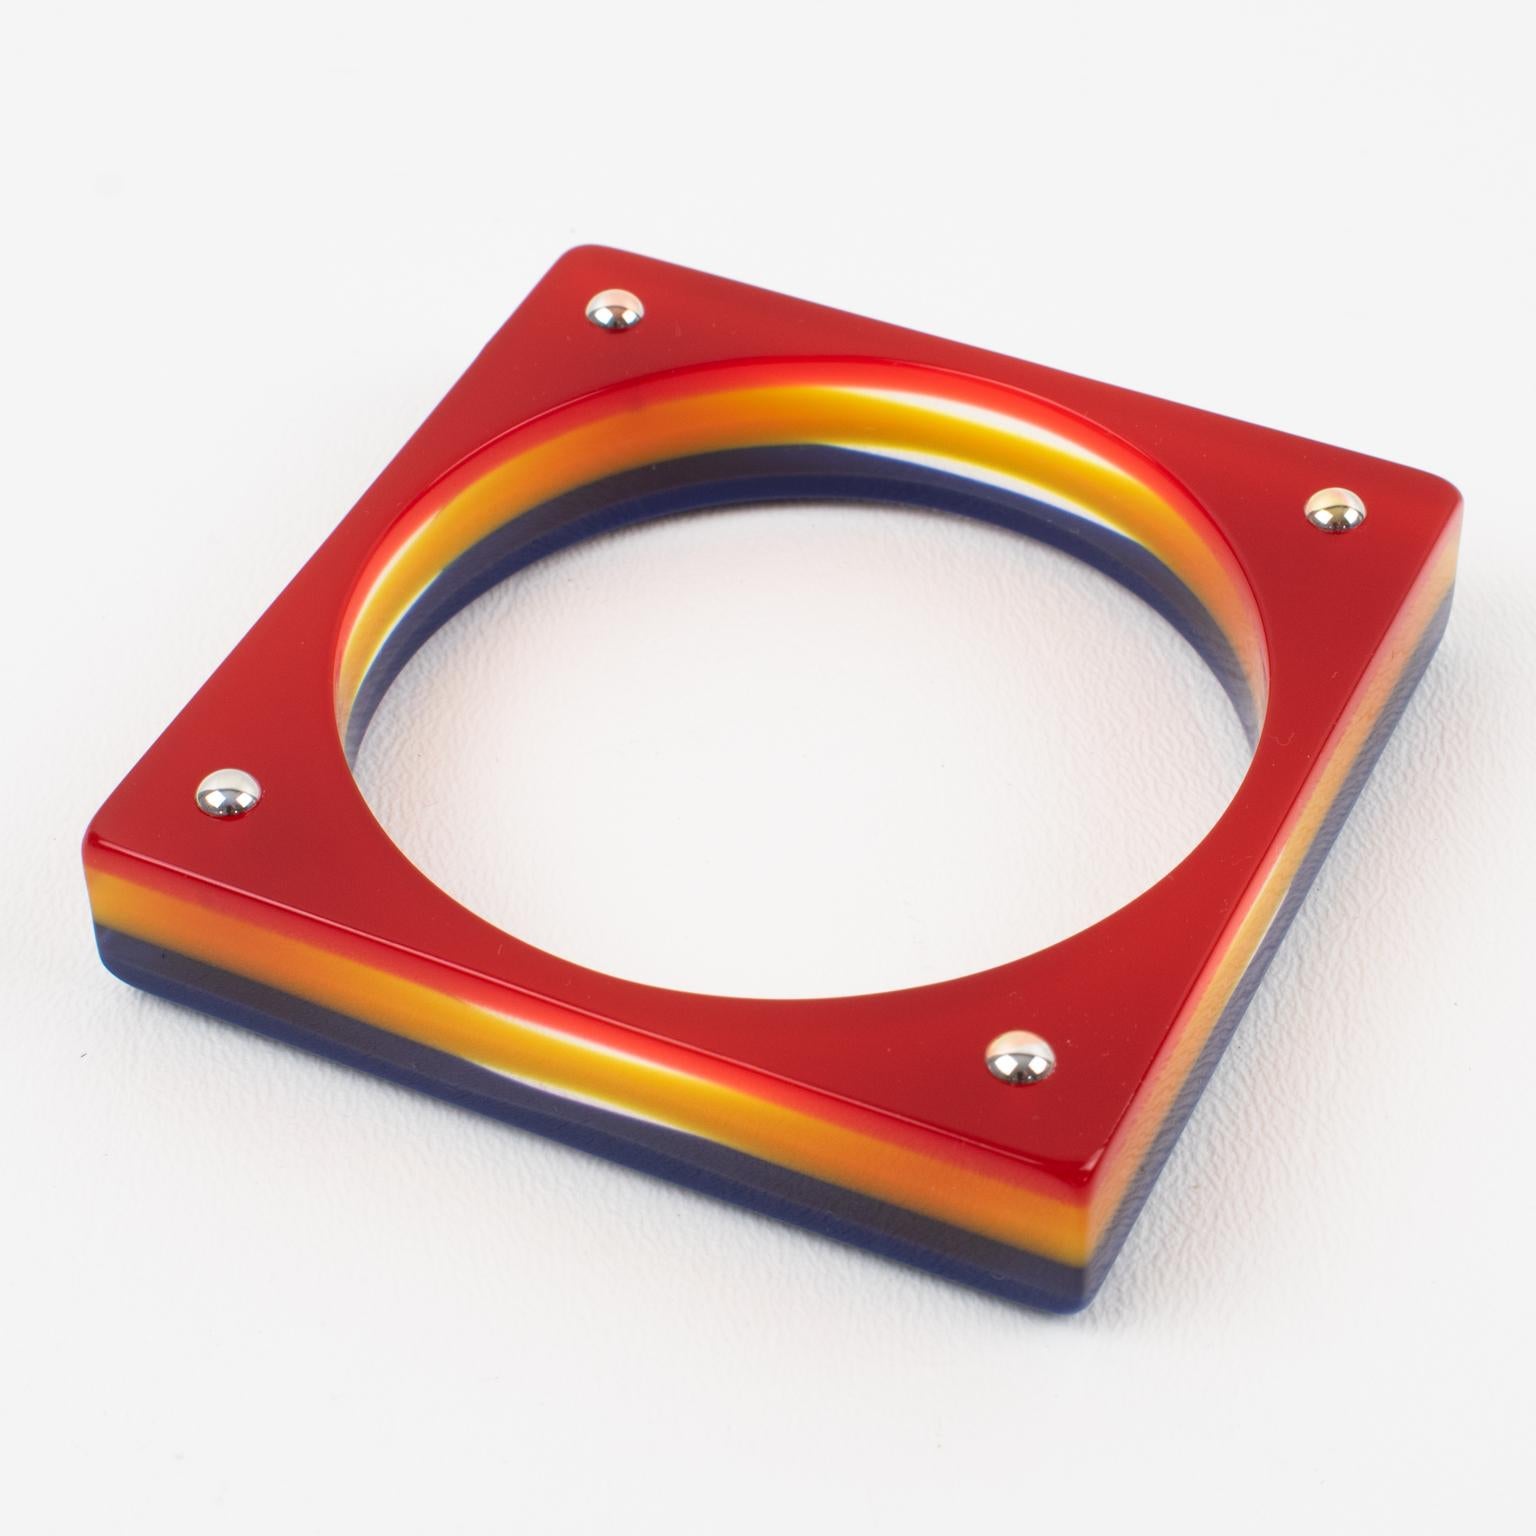 Karl Lagerfeld Red, Yellow and Blue Resin Square Bracelet For Sale 2